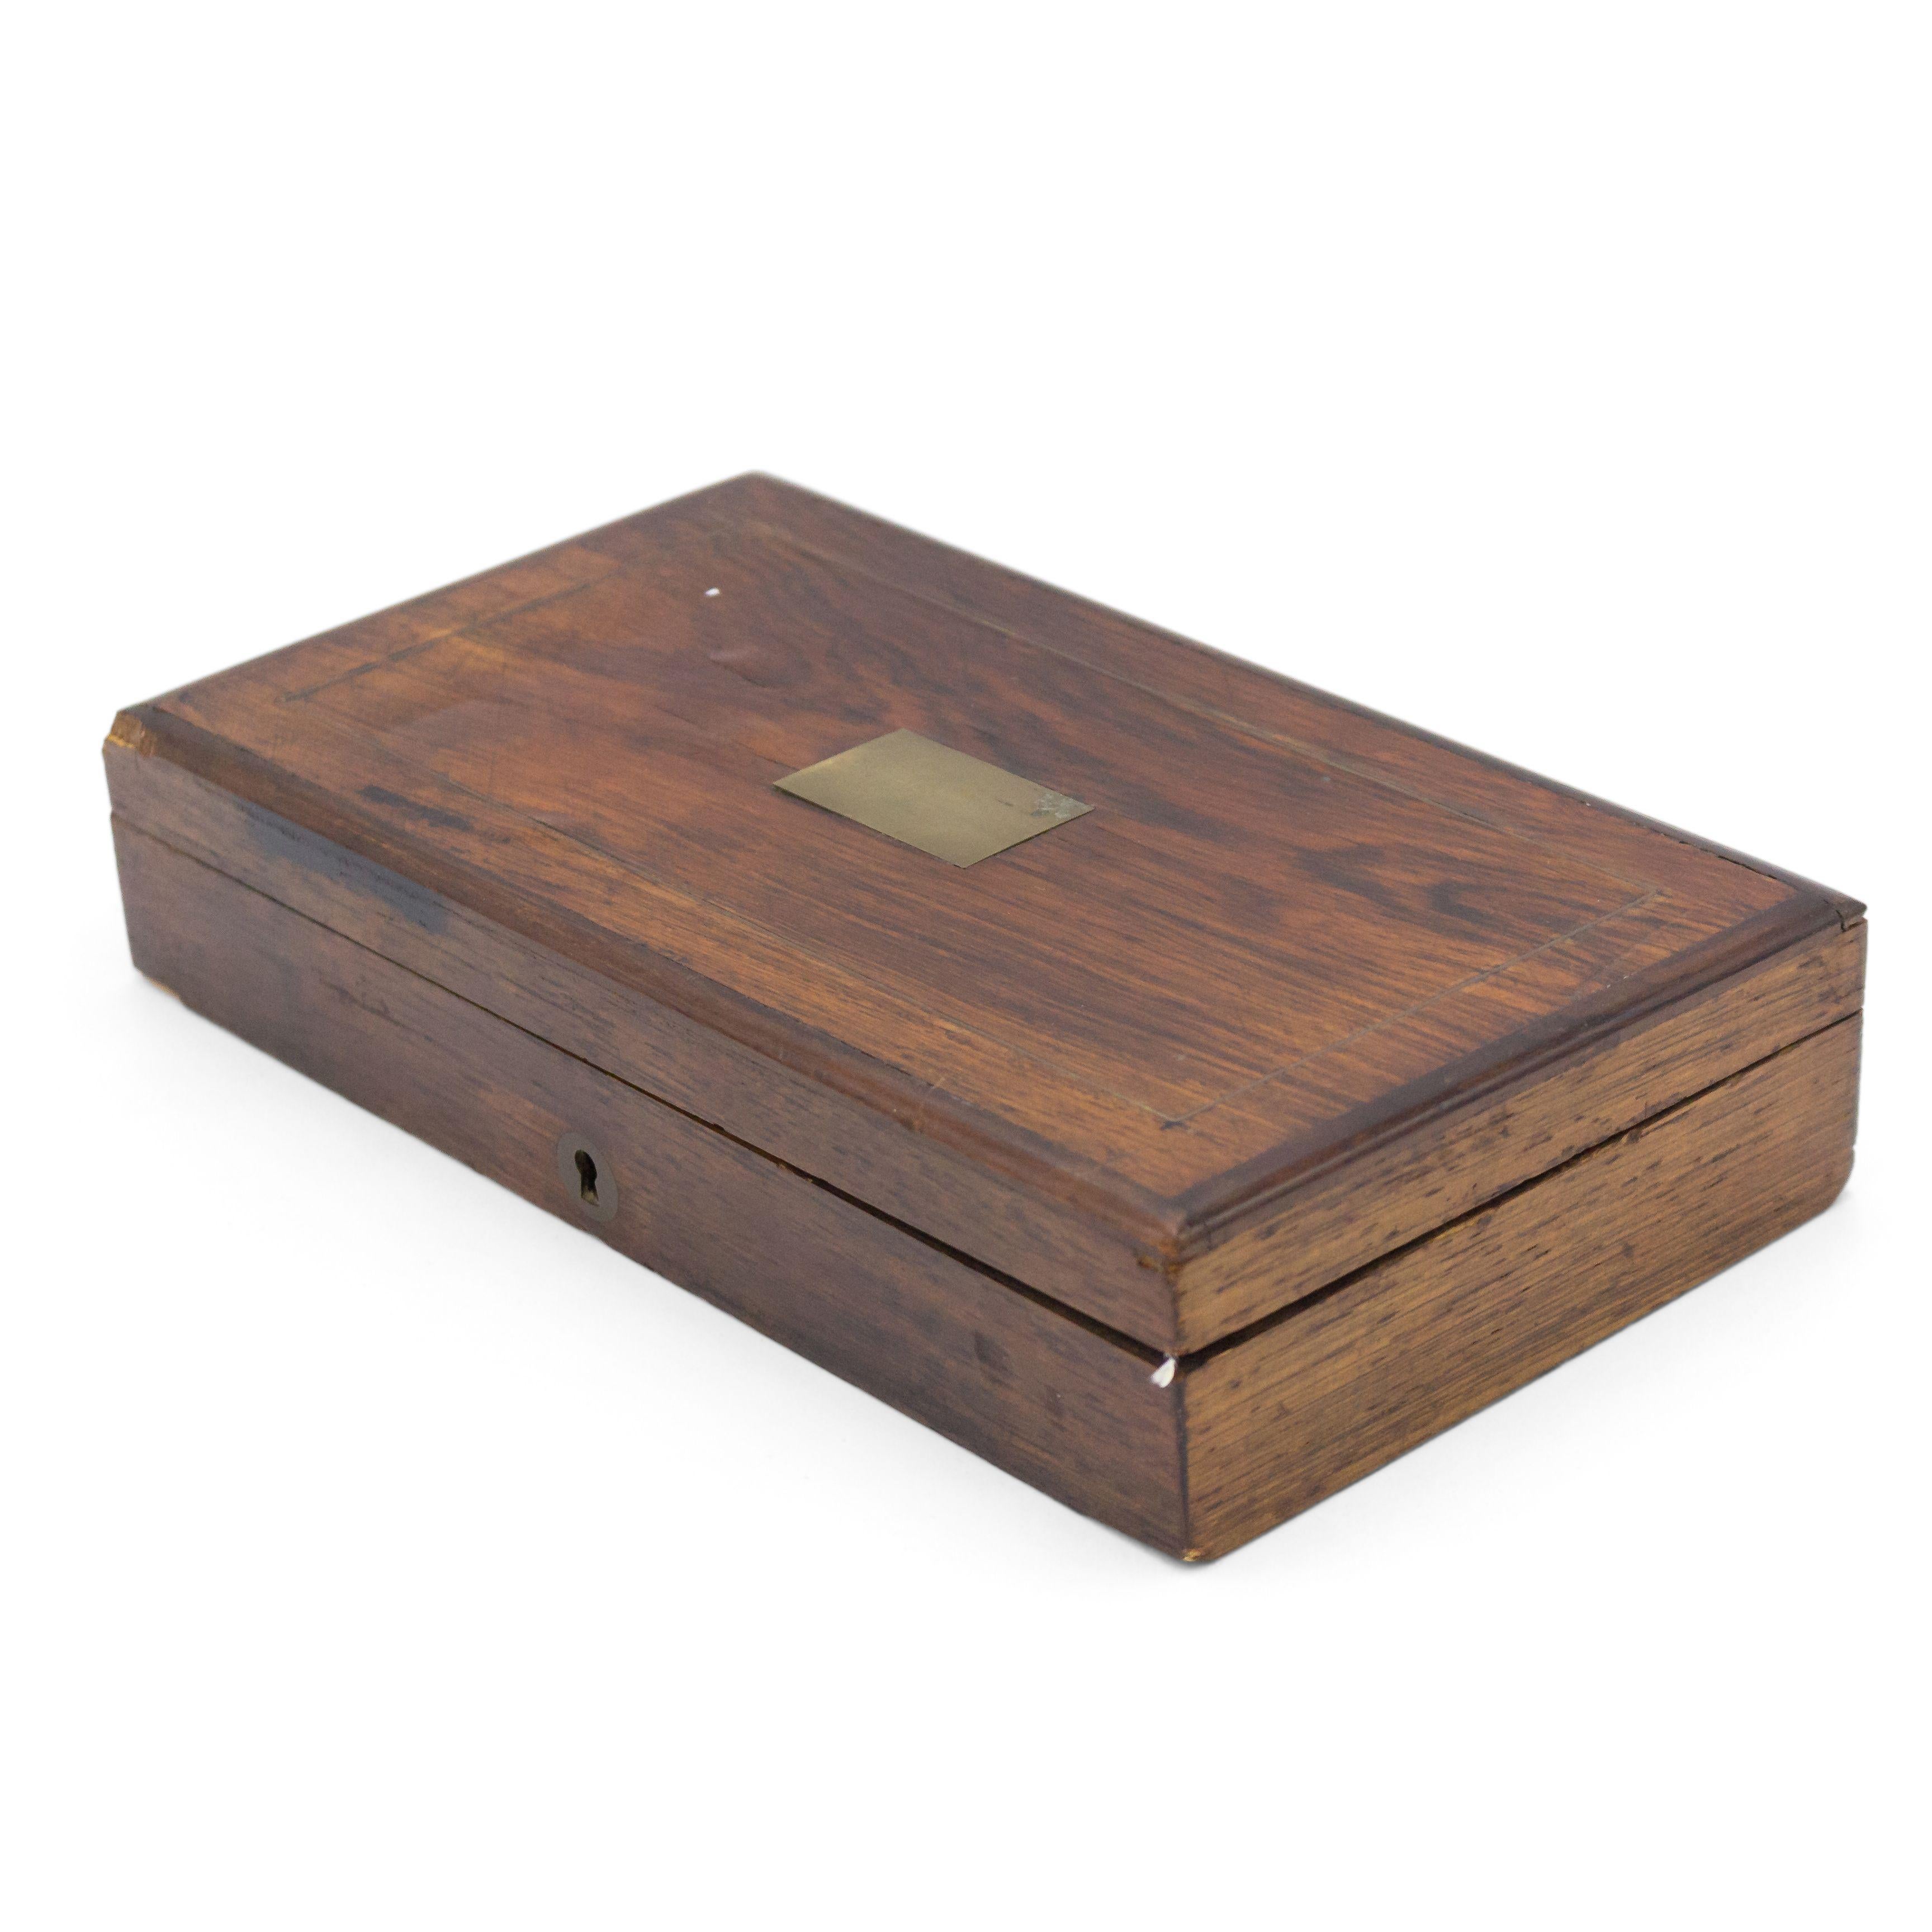 English Victorian style rectangular wood box with a brass escutcheon and a rectangular brass inlay on lid.
       